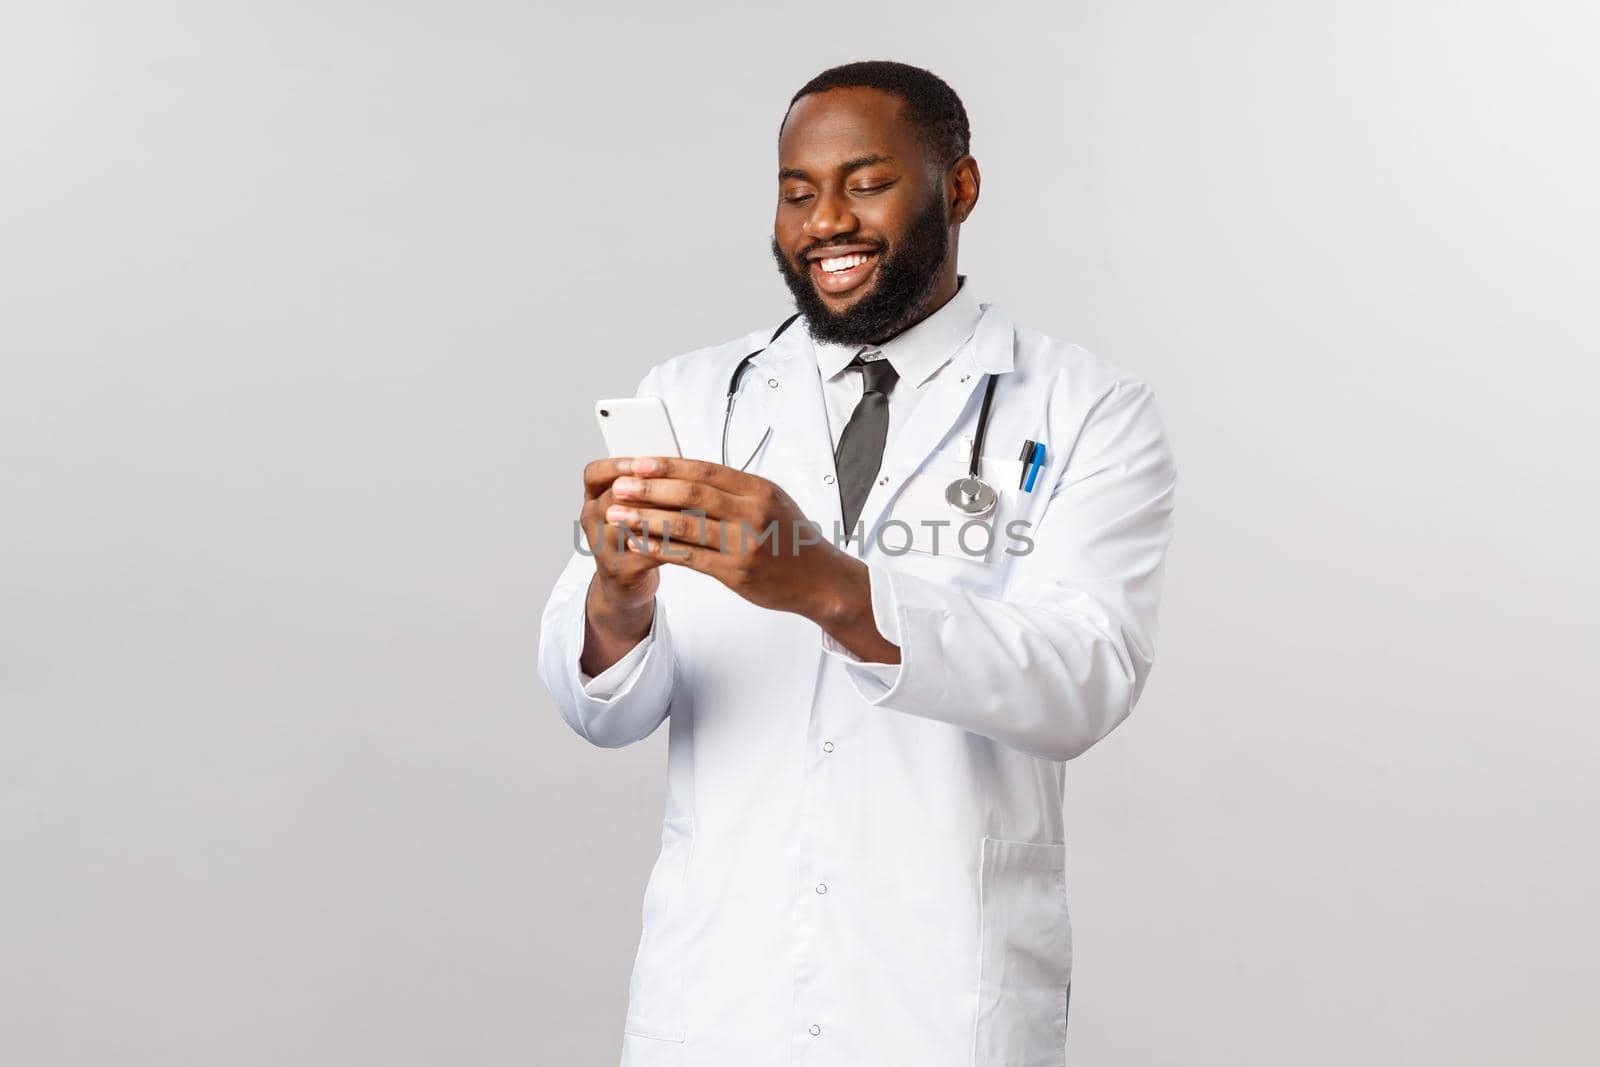 Covid19, pandemic and online medicine concept. Happy satisfied african-american doctor working hard in hospital during outbreak coronavirus, look at mobile phone, videcalling family with smartphone.